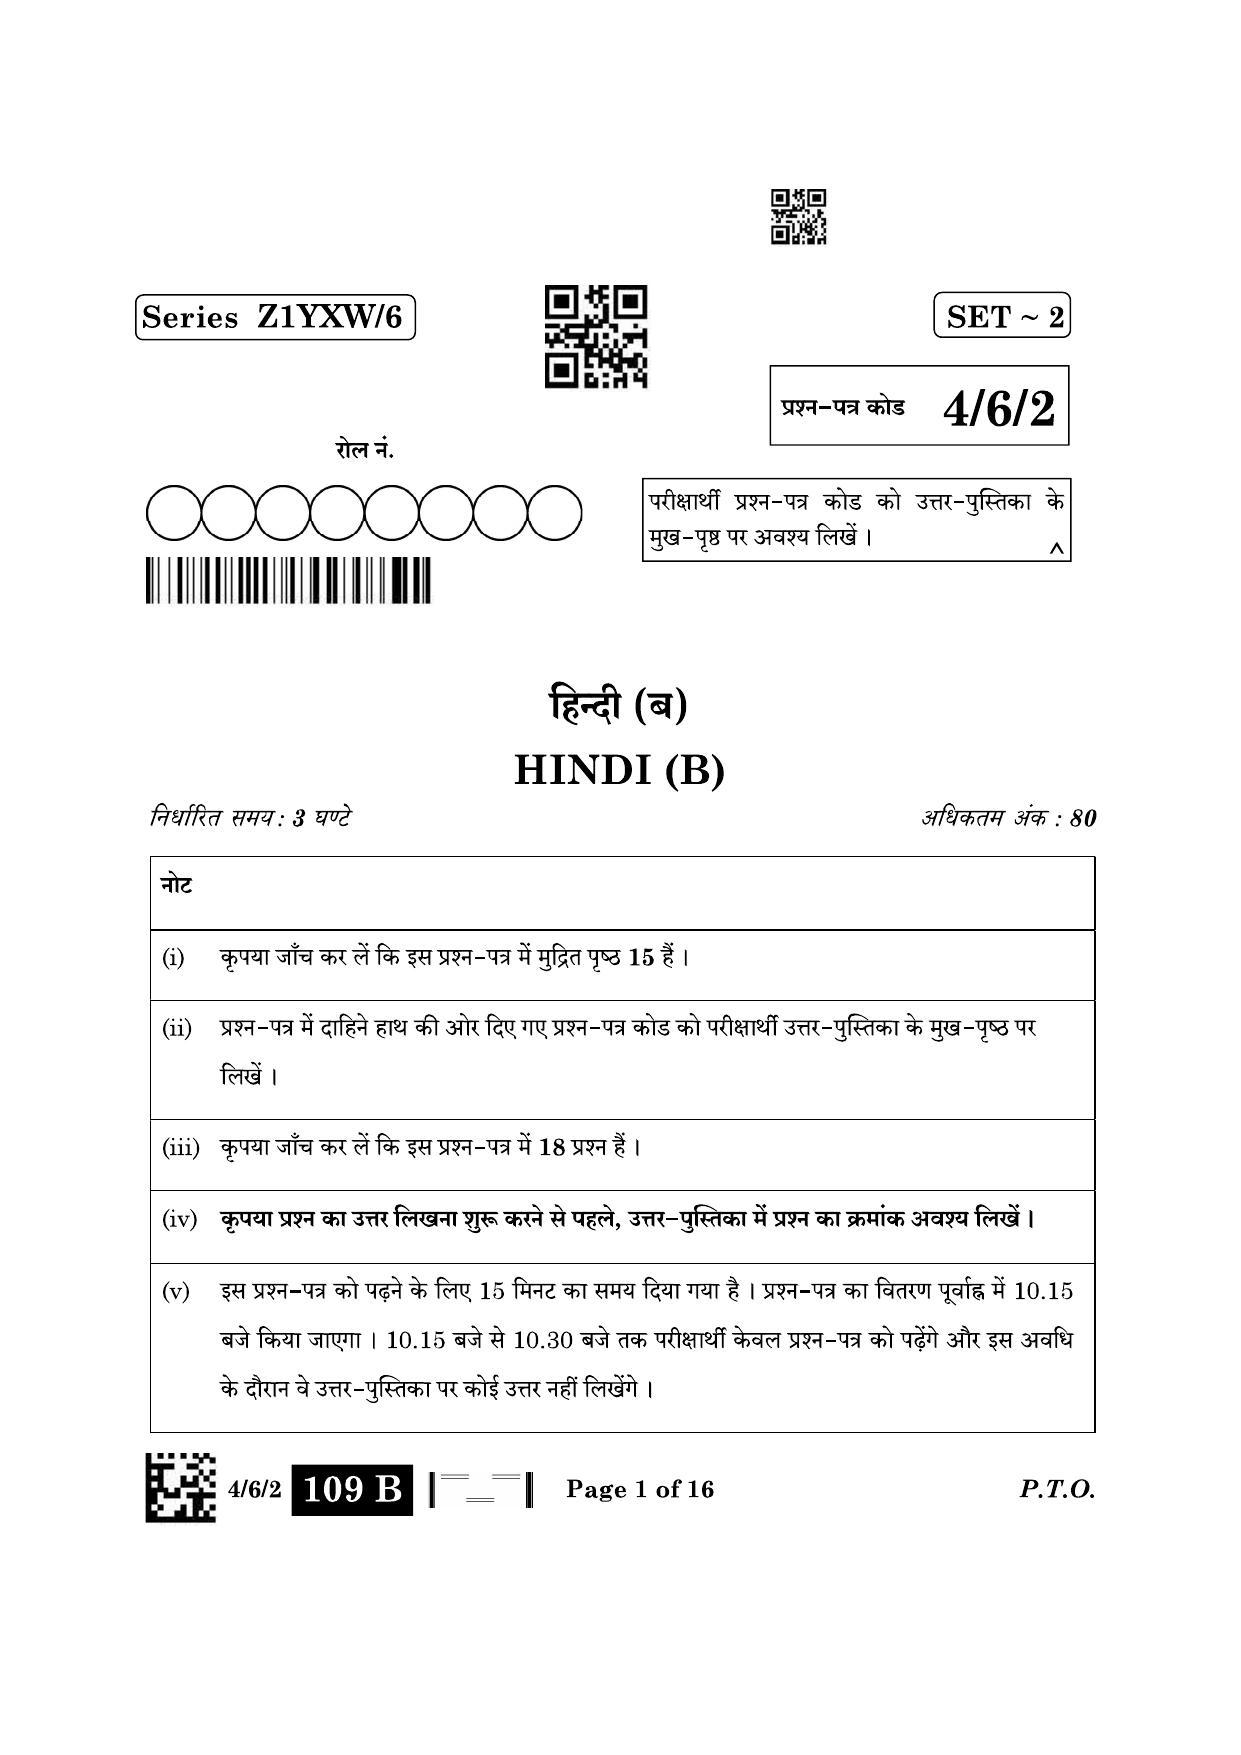 CBSE Class 10 4-6-2 Hindi B 2023 Question Paper - Page 1